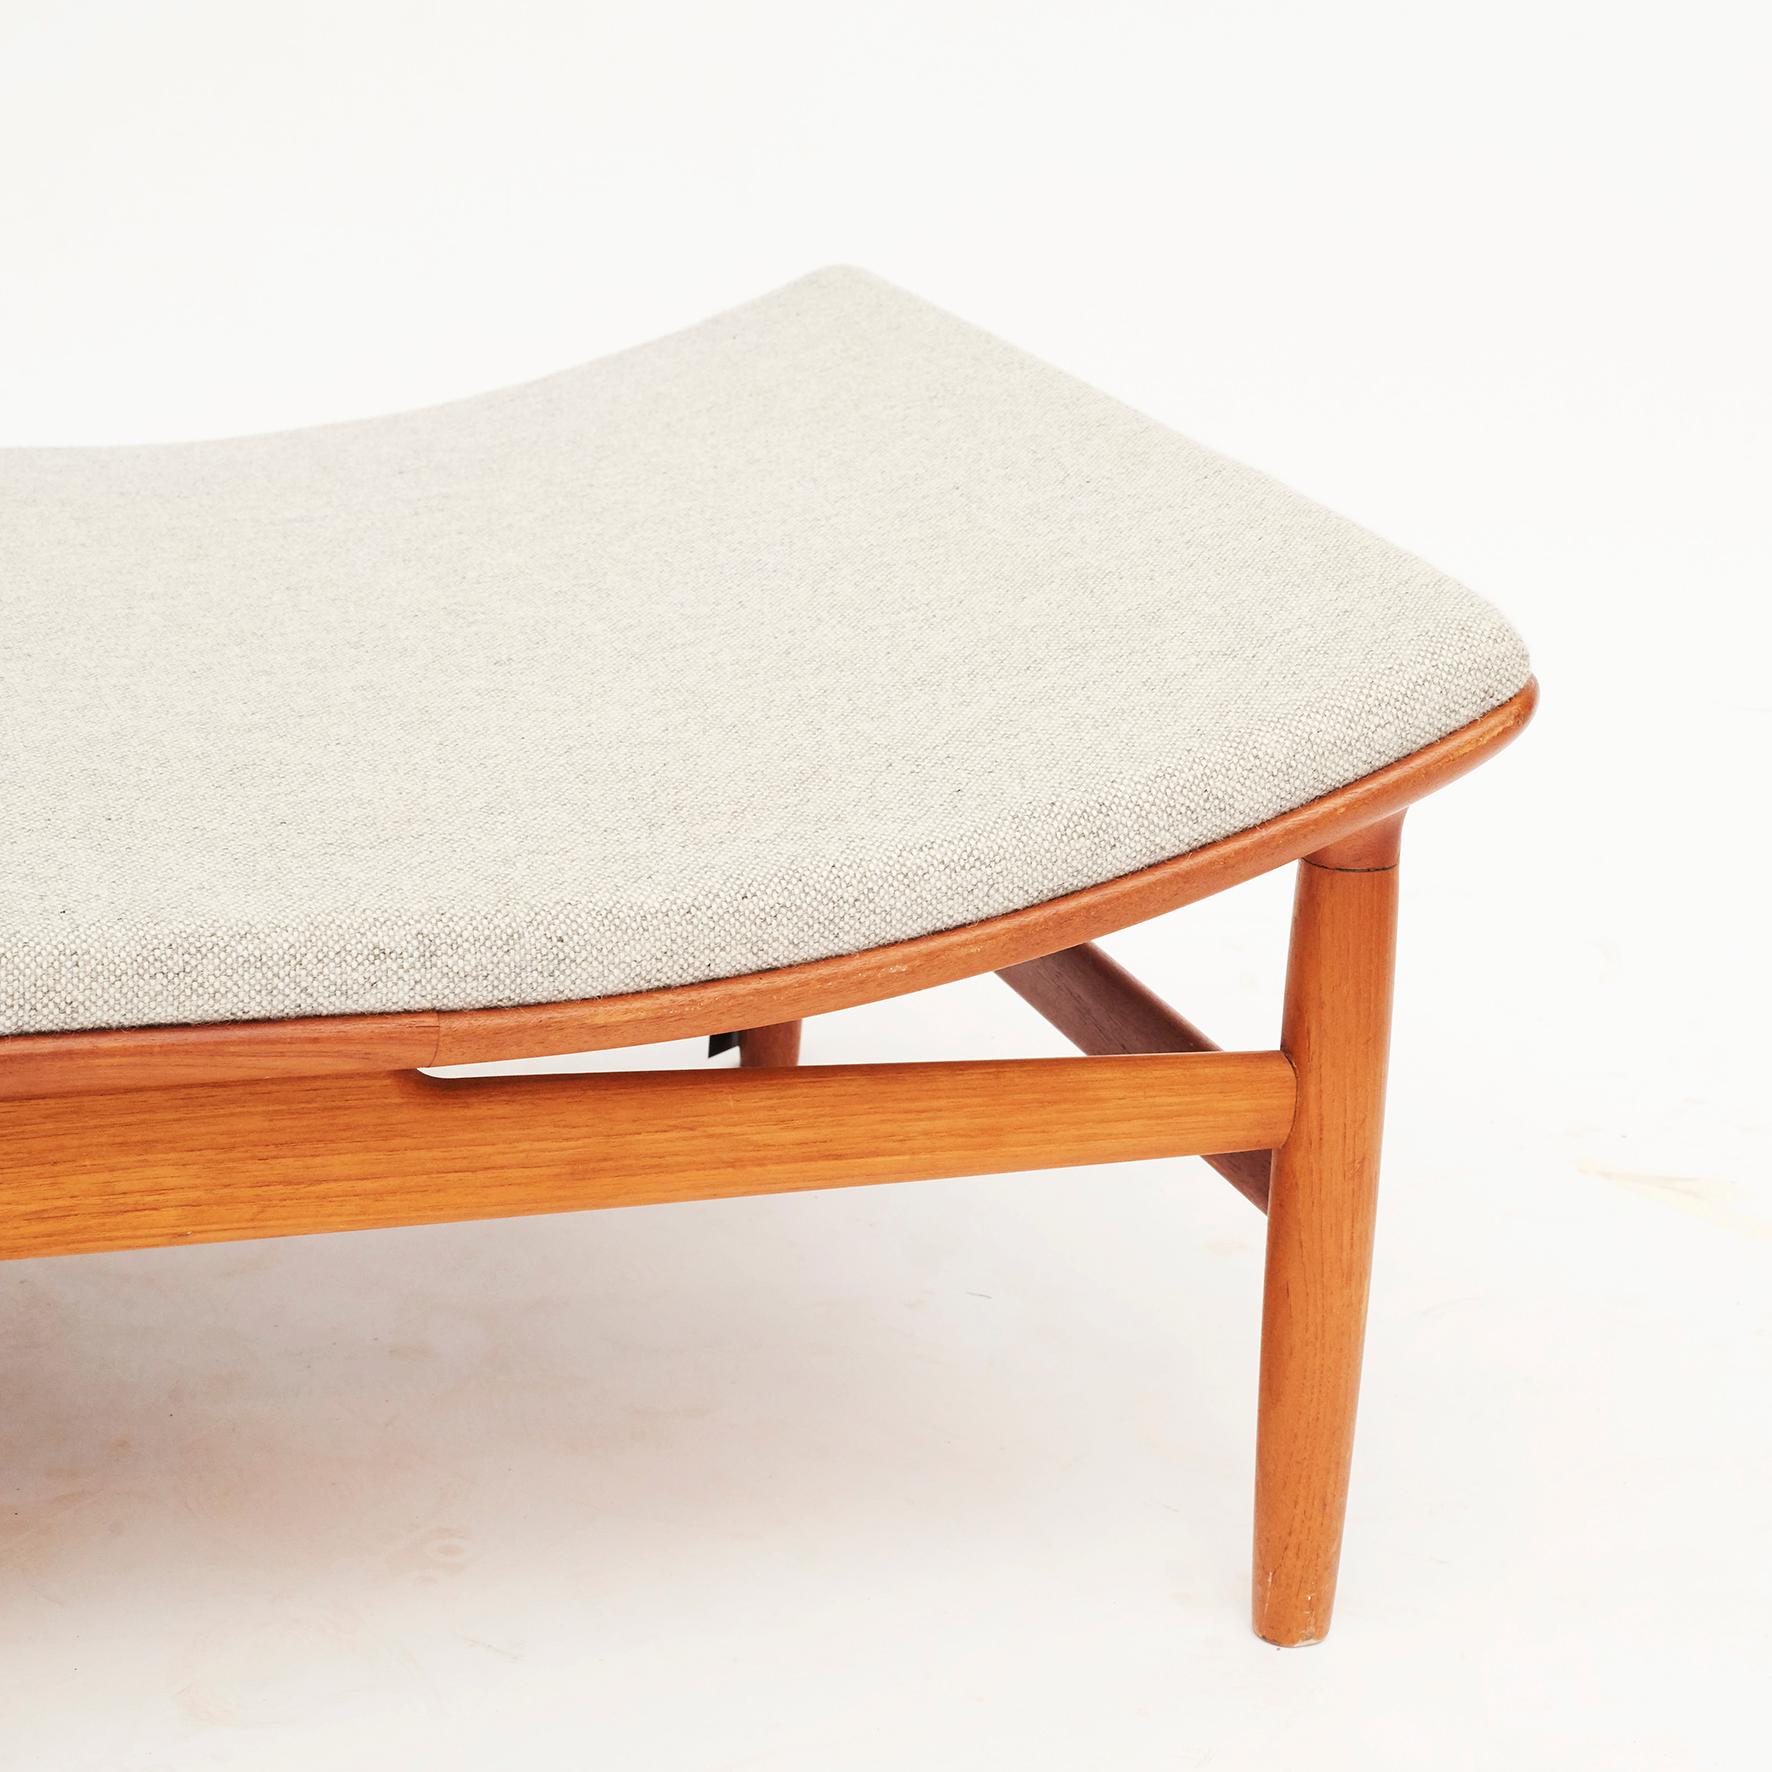 Rare and beautiful daybed by Kurt Østervig for Jason. No. 311.
Solid teak wood frame, upholstered in wool from Kvadrat designed by Nanna Ditzel.